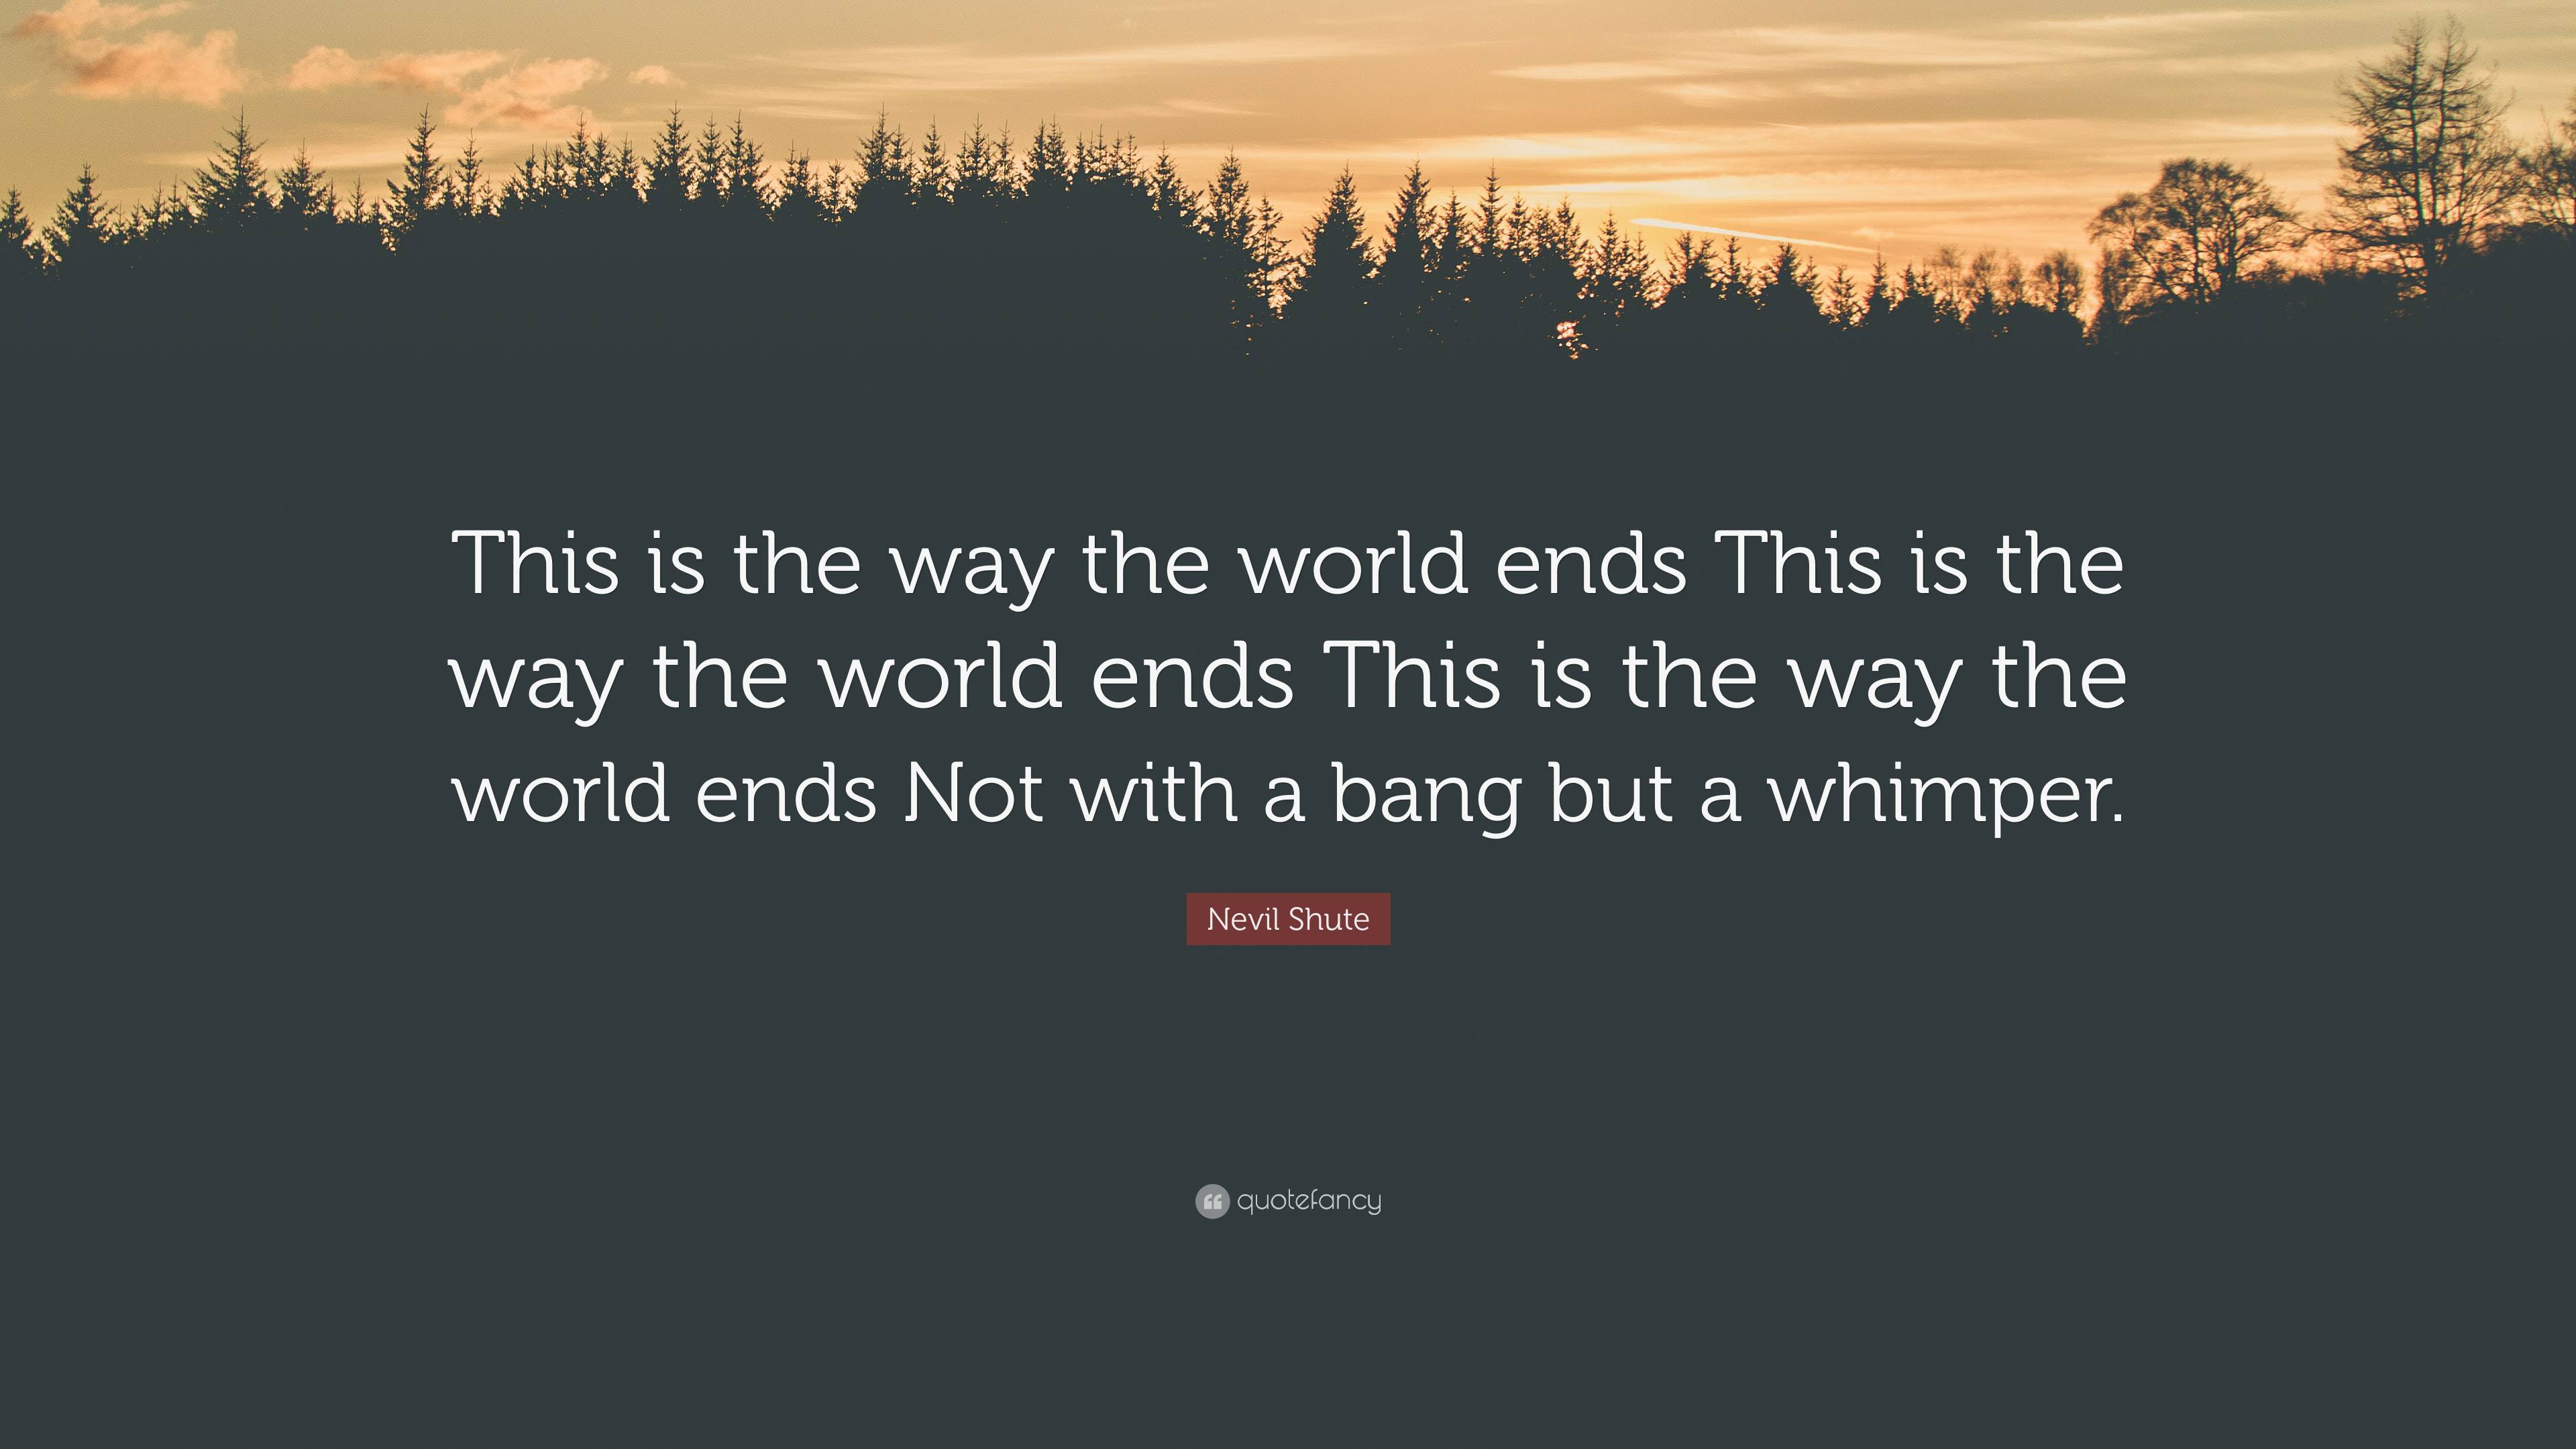 Nevil Shute Quote “this Is The Way The World Ends This Is The Way The World Ends This Is The 9888